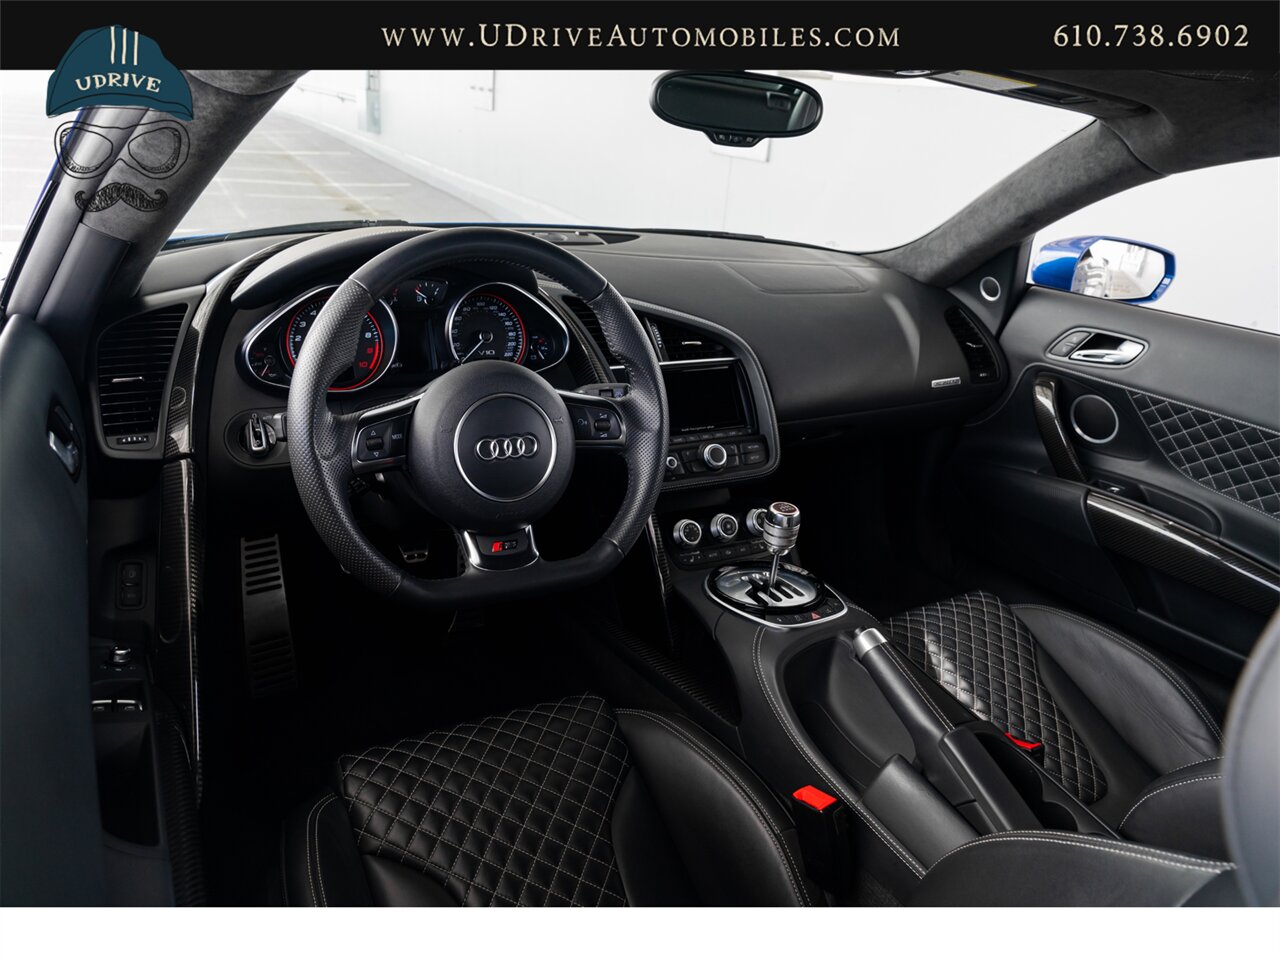 2015 Audi R8 5.2 V10 Quattro 6 Speed Manual 10k Miles  Diamond Stitched Leather 1 of 2 - Photo 6 - West Chester, PA 19382